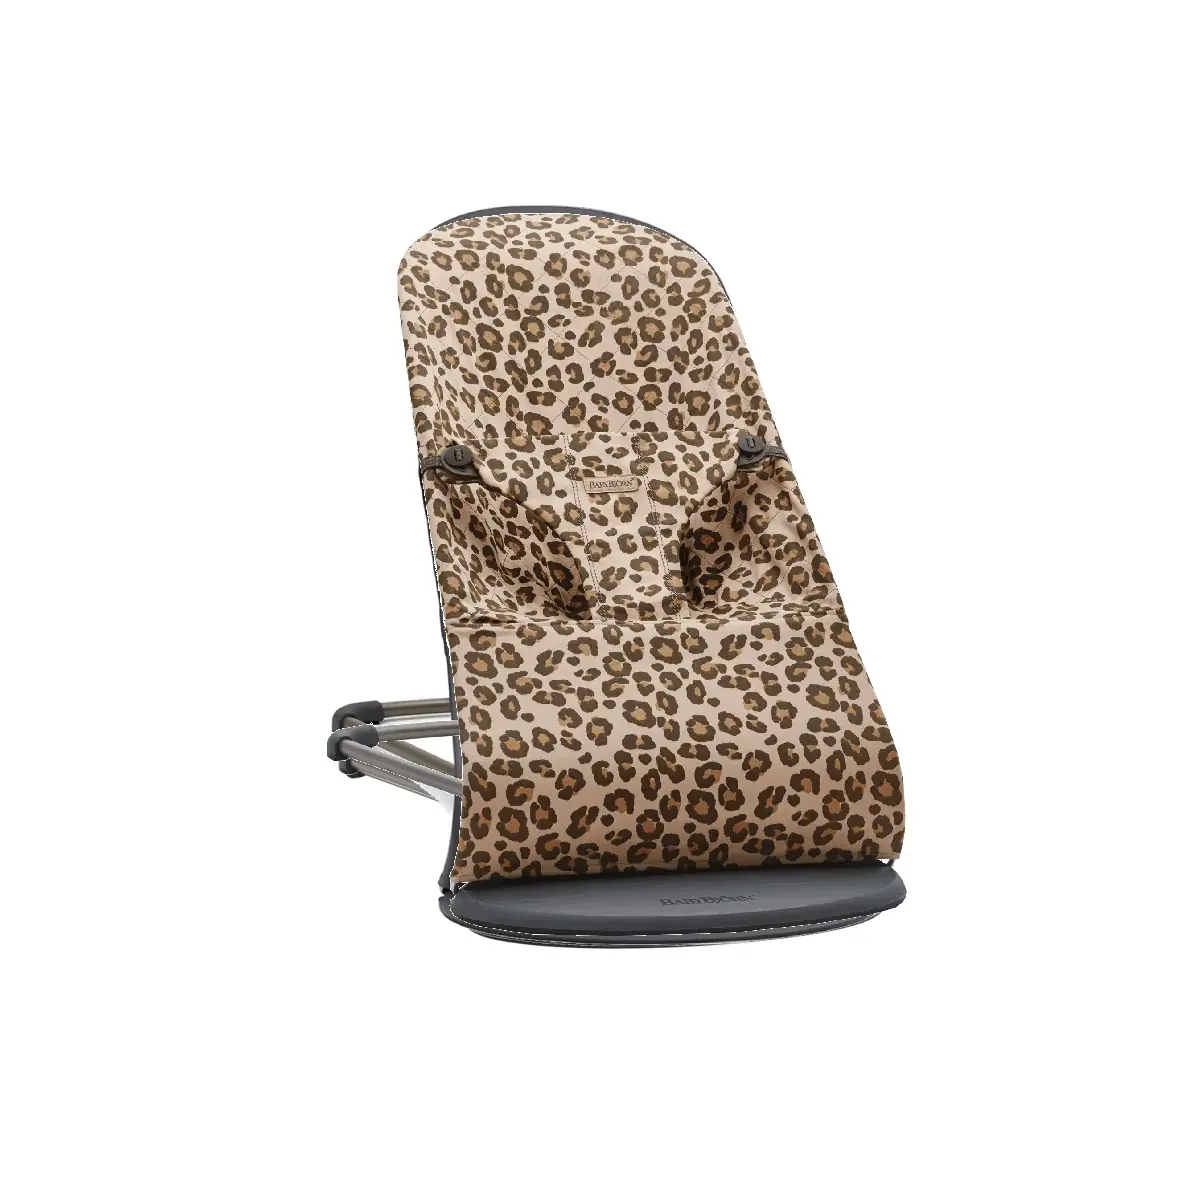 Image of BABYBJÖRN Bliss Cotton Quilt Bouncer - Leopard Print